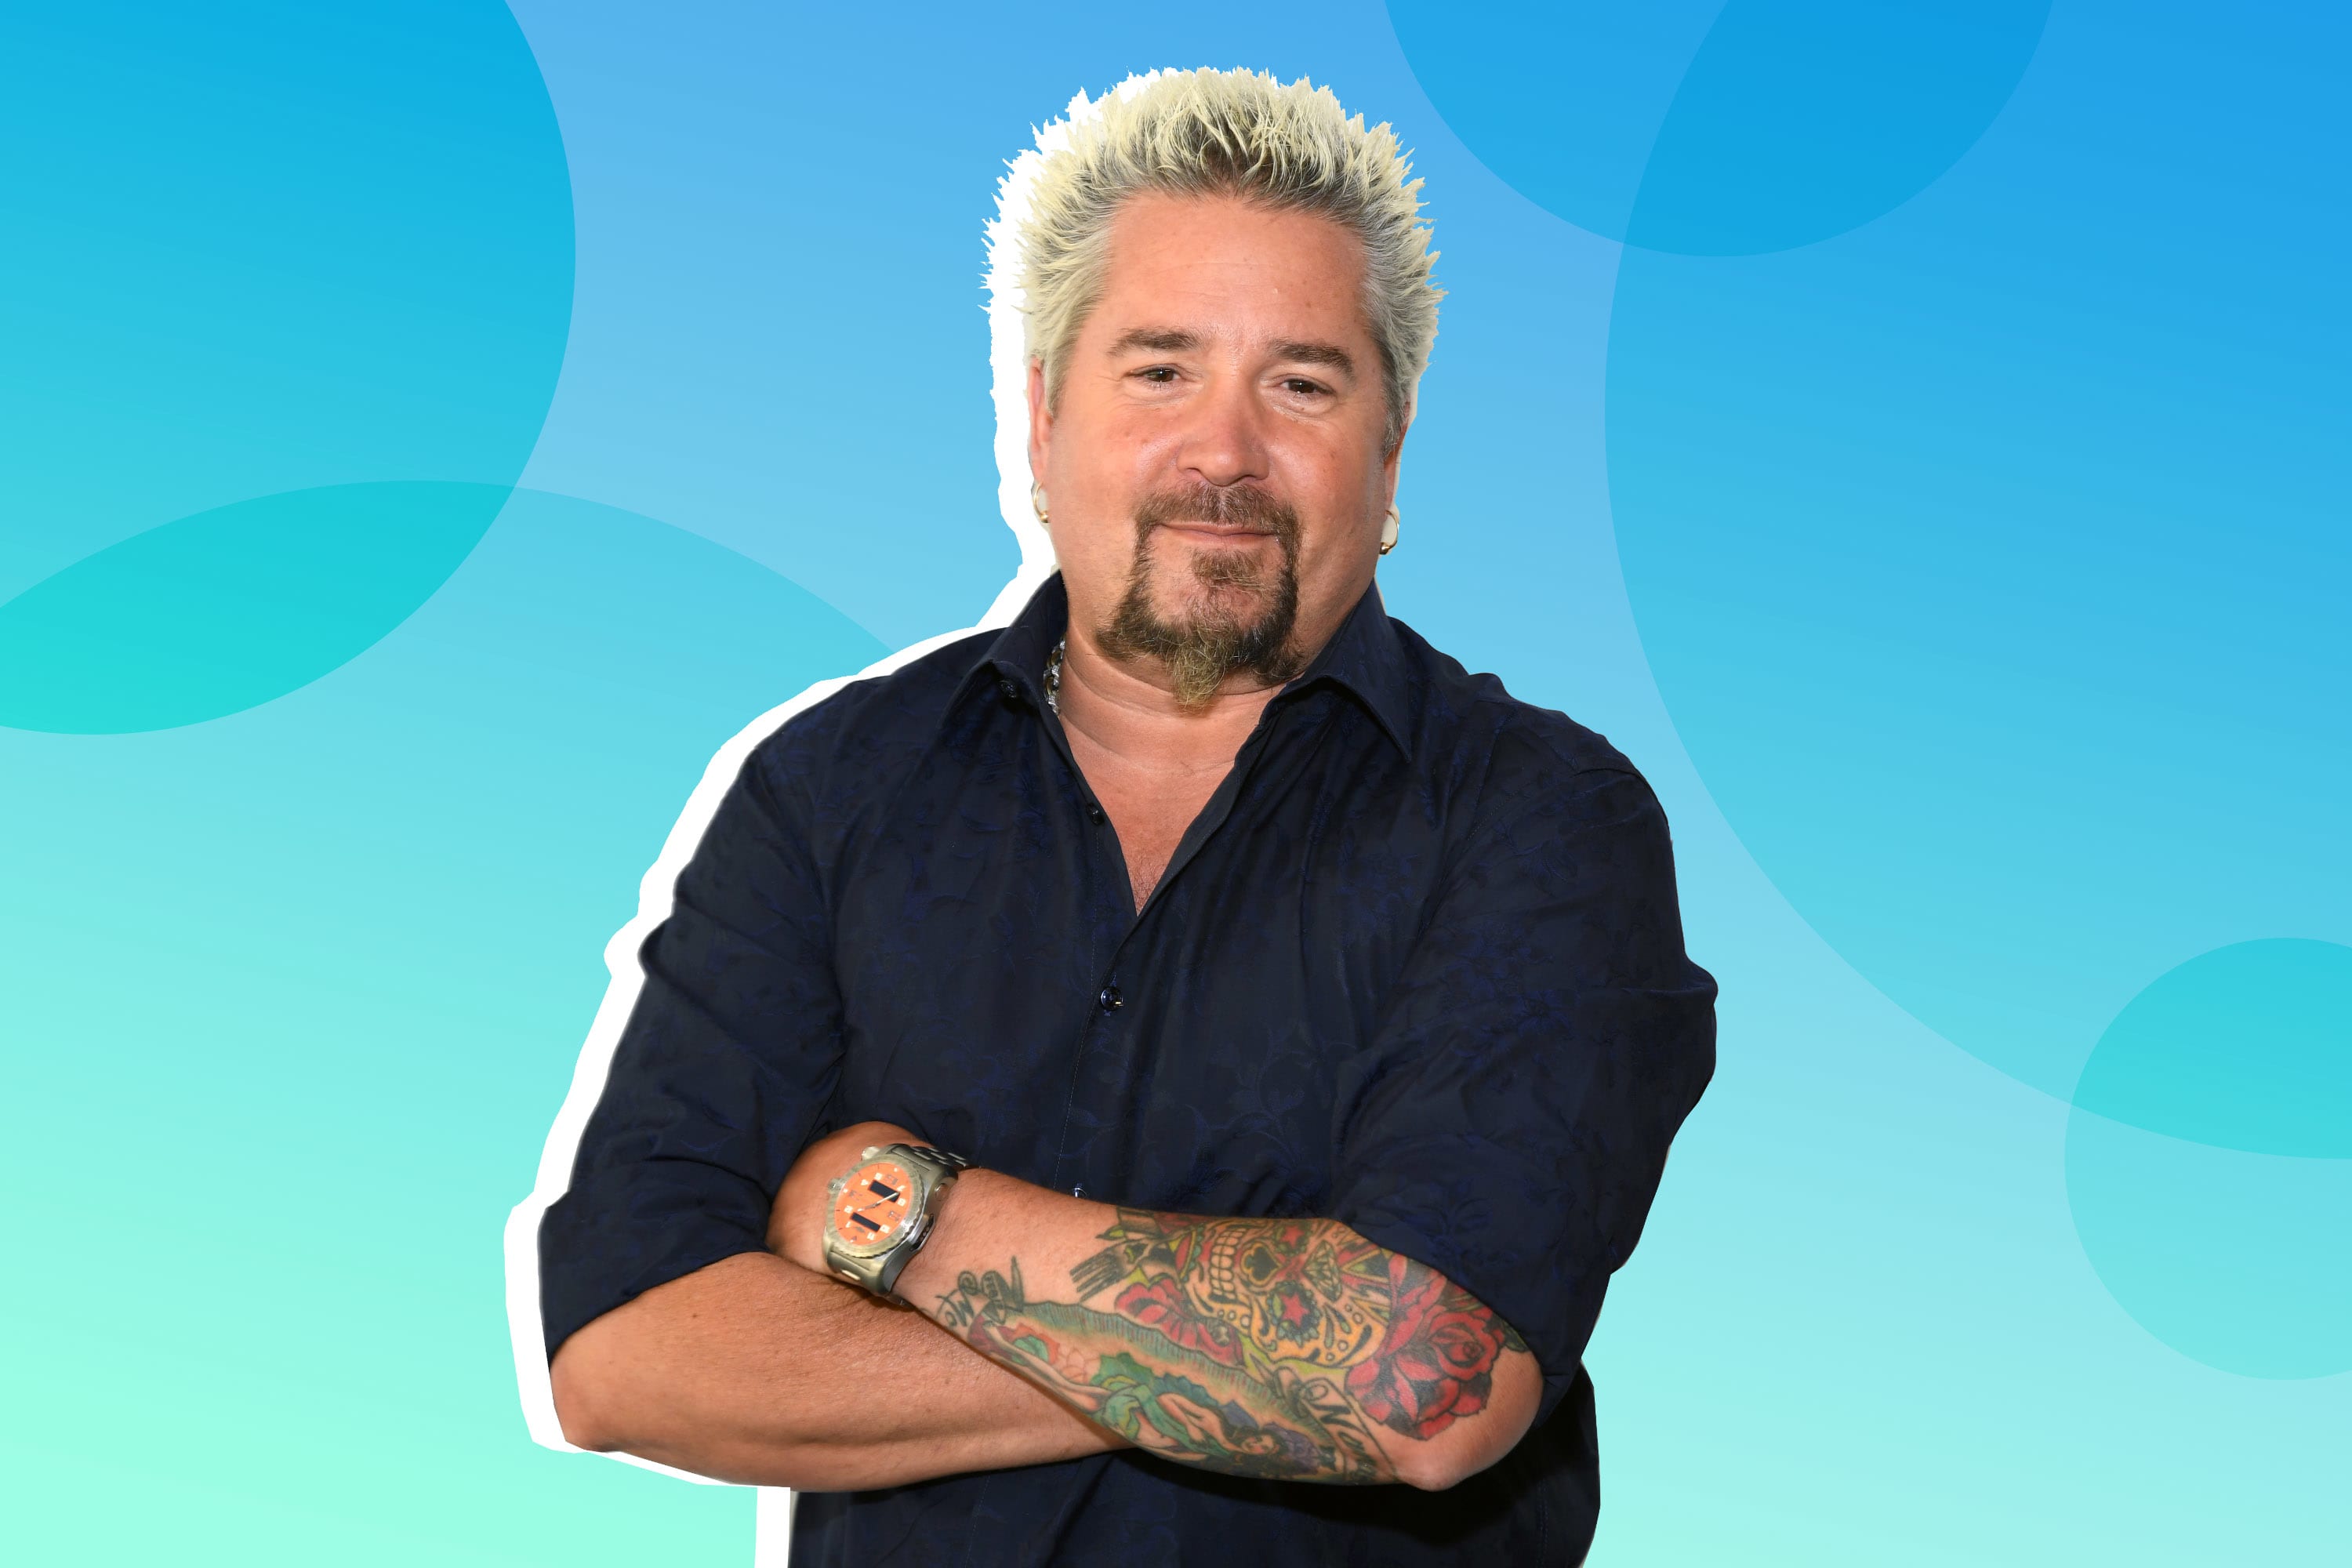 Guy Fieri's luxury knife set is a must-have for every chef